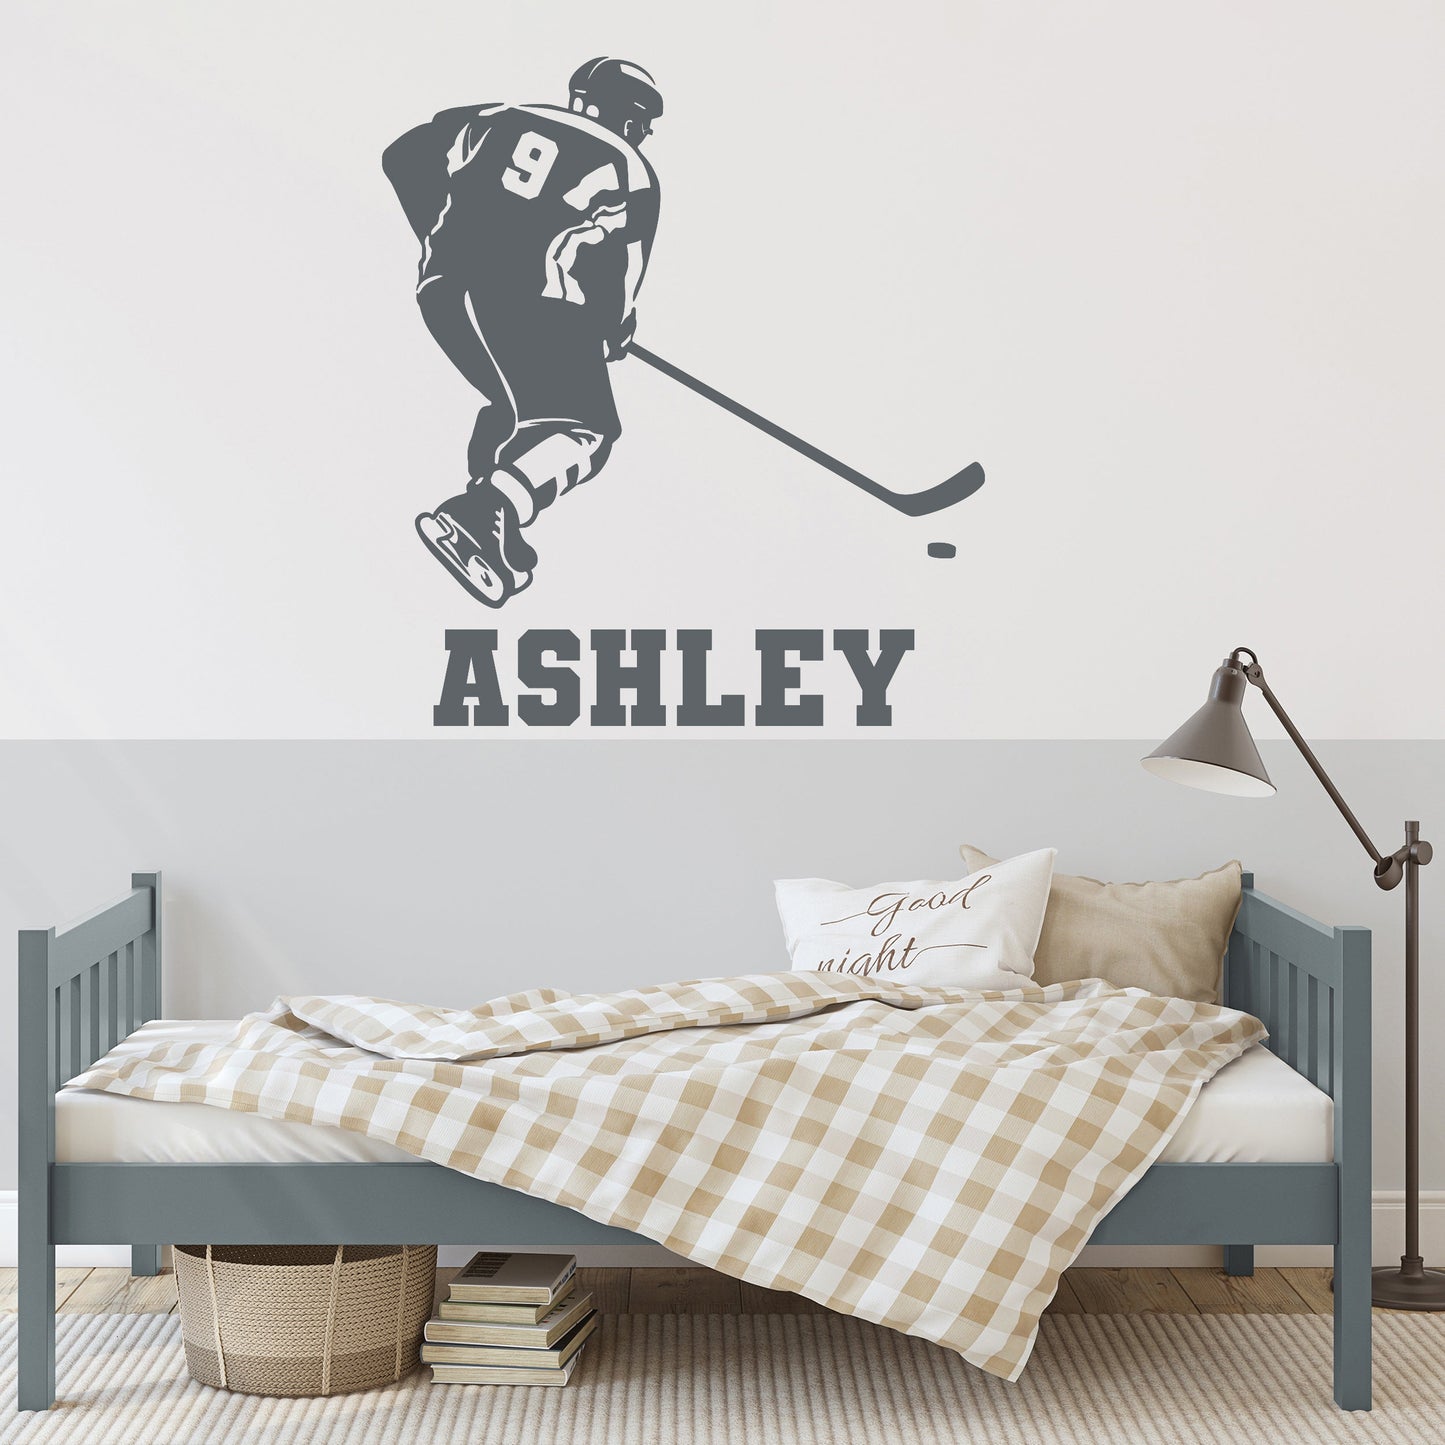 Personalized Hockey wall Decals - Personalized Decals for Hockey Fans, Hockey Wall Clings, and Hockey Room Decor - Hockey Wall Stickers